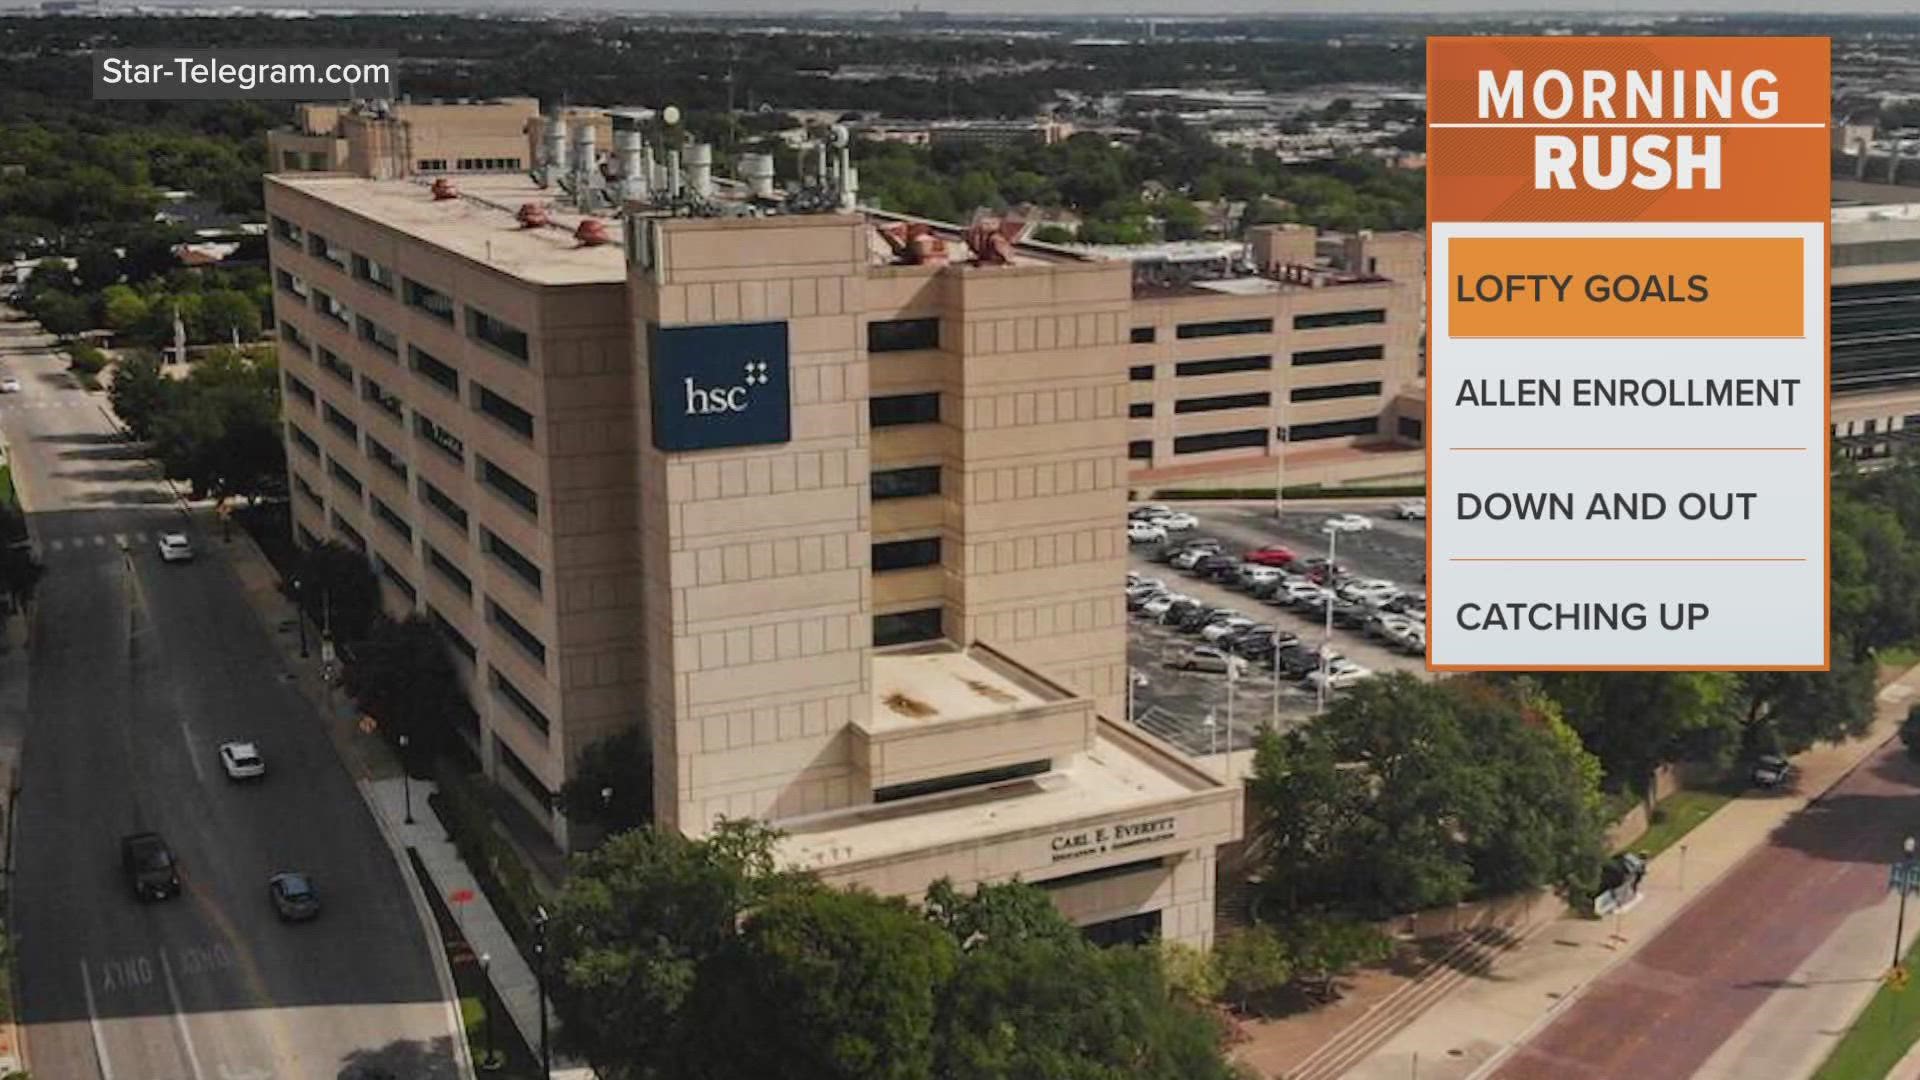 According to Fort Worth Star-Telegram, the department was granted $7.2 million and ended up administering 9% of their goal in vaccines.